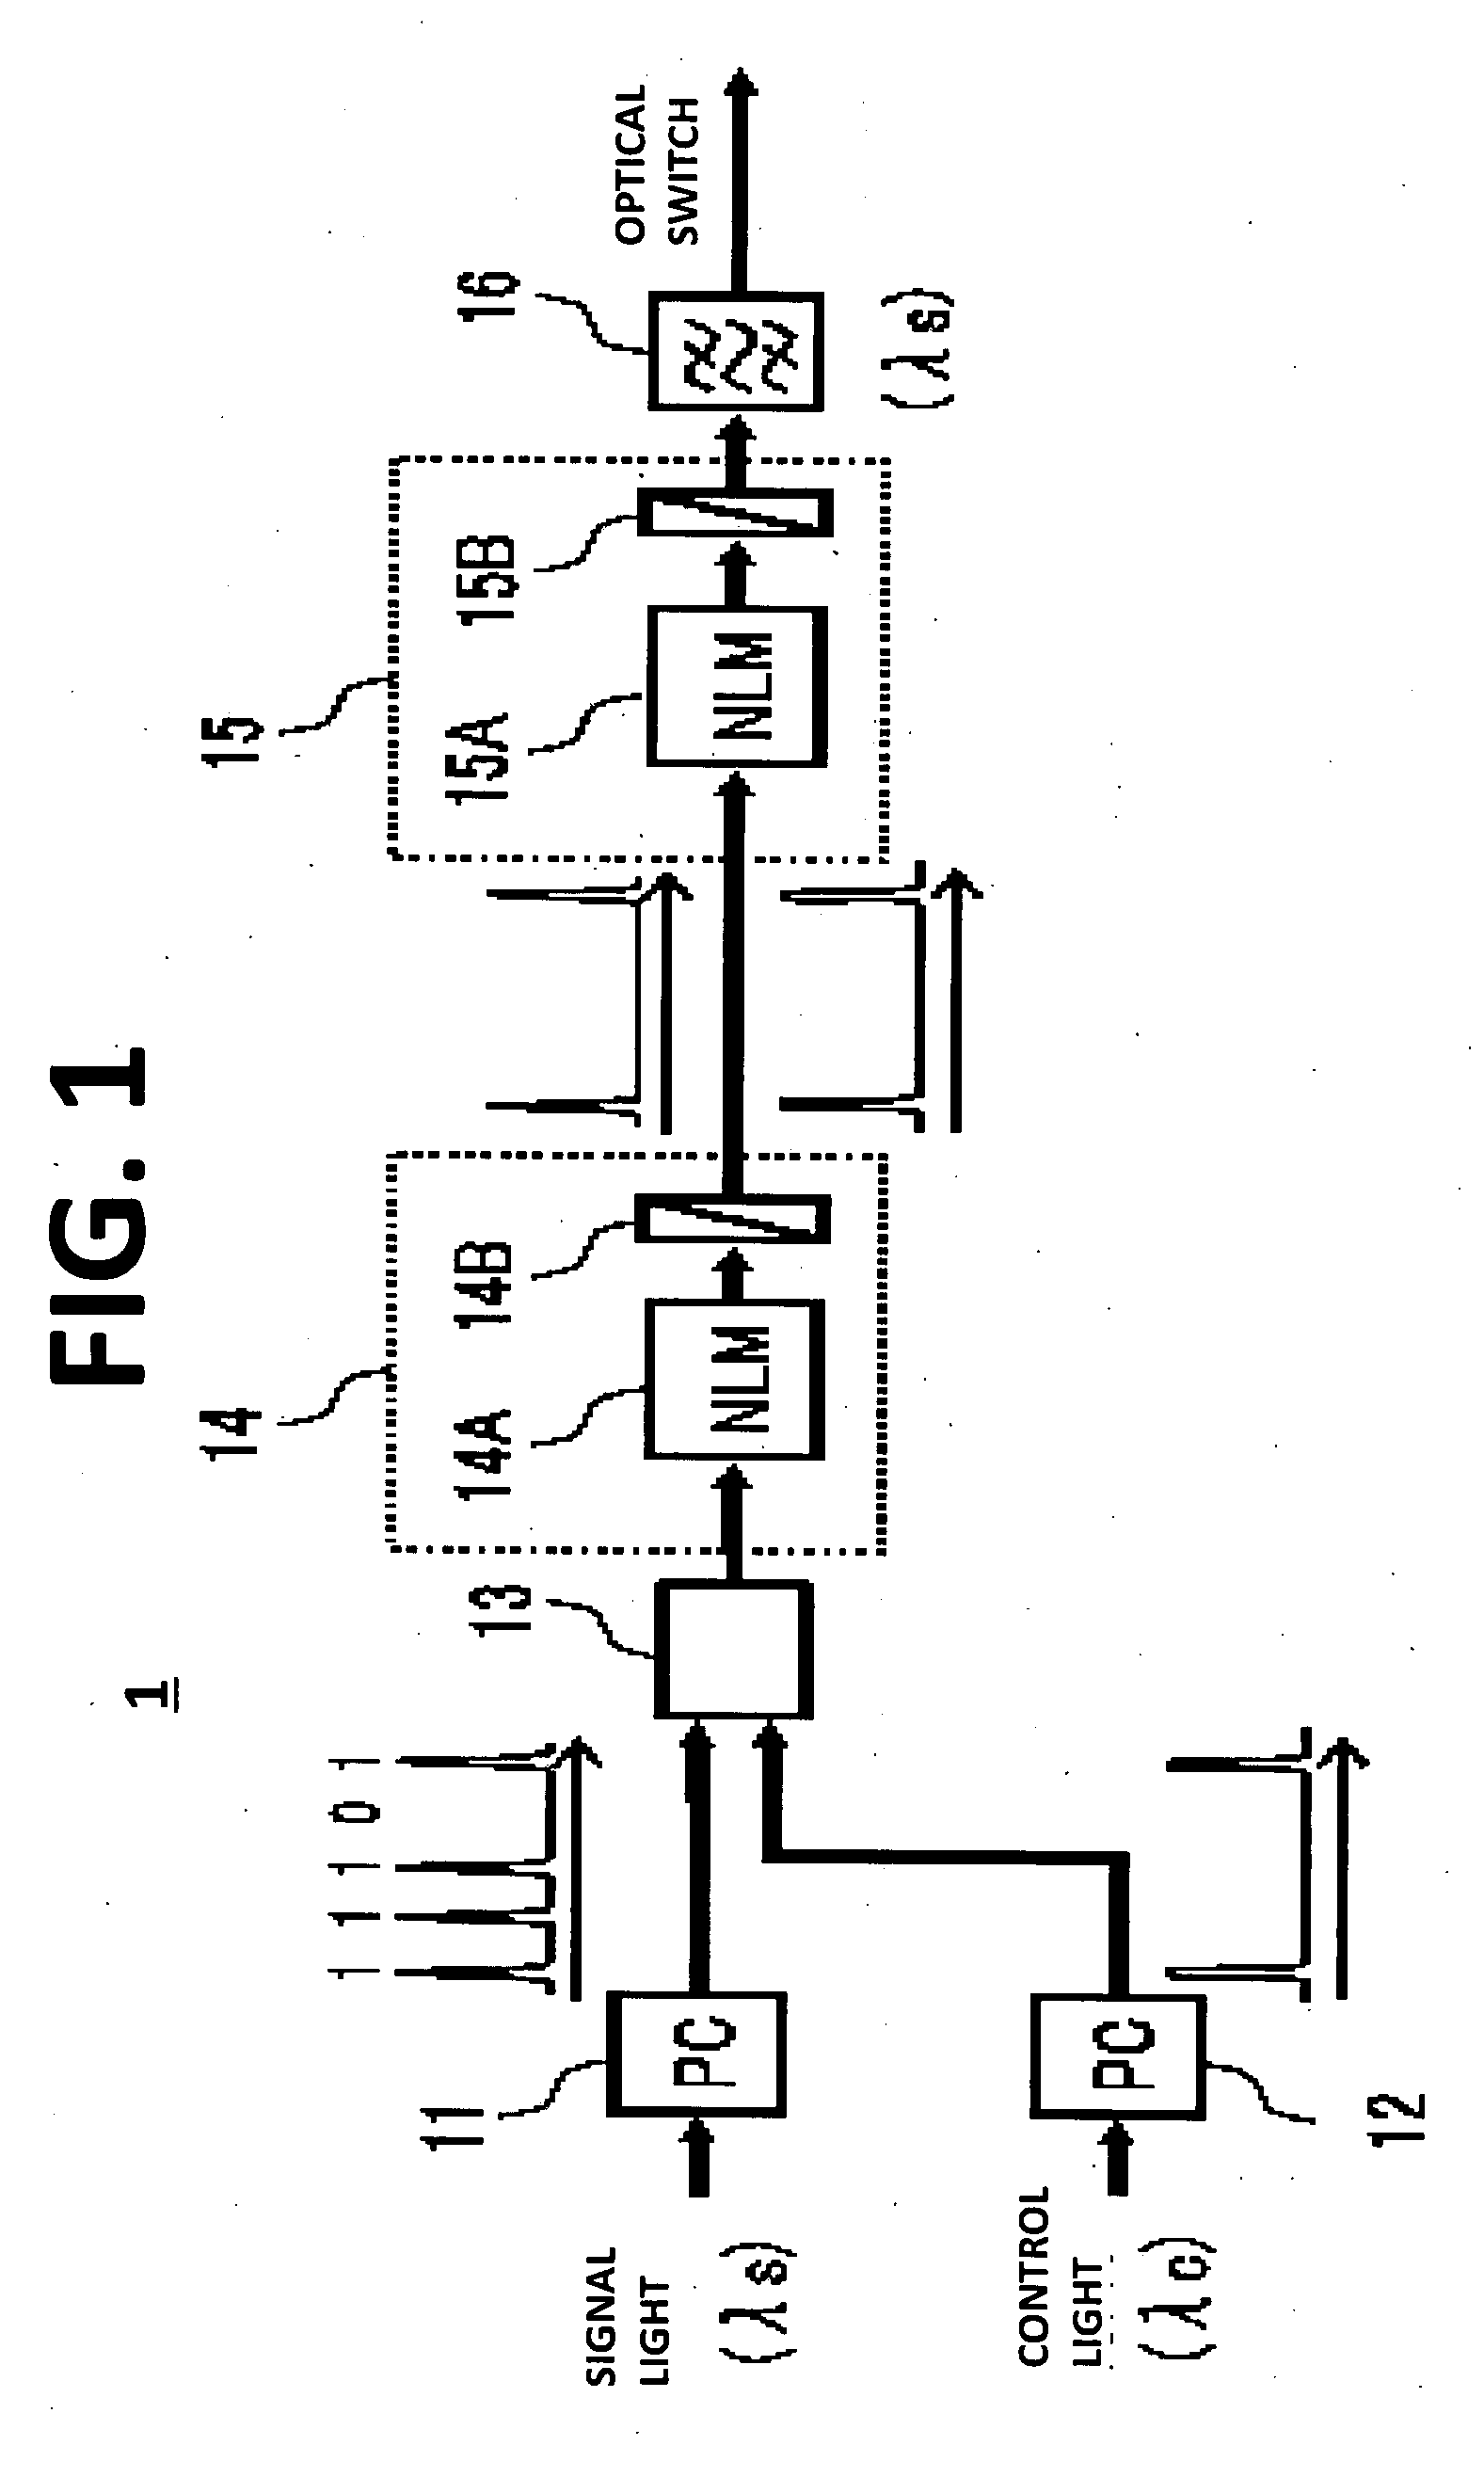 Optical switch and optical waveform monitoring apparatus